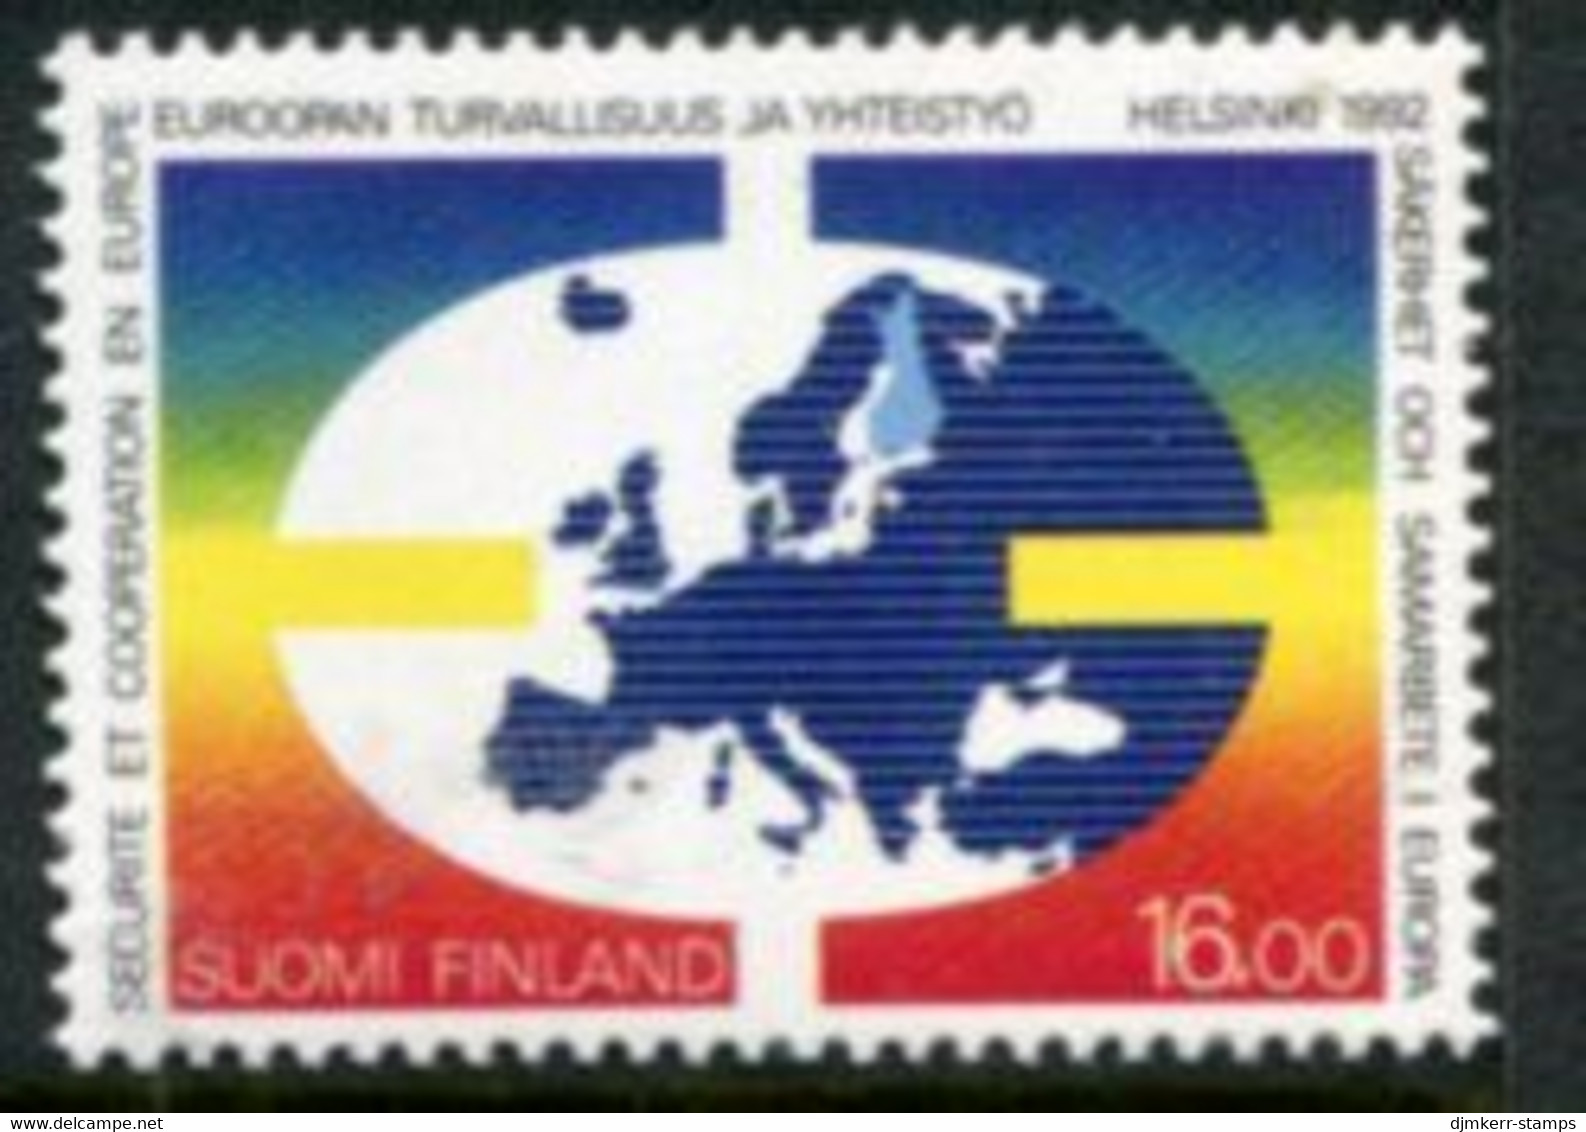 FINLAND 1992 European Security Conference MNH / **.  Michel 1166 - Unused Stamps